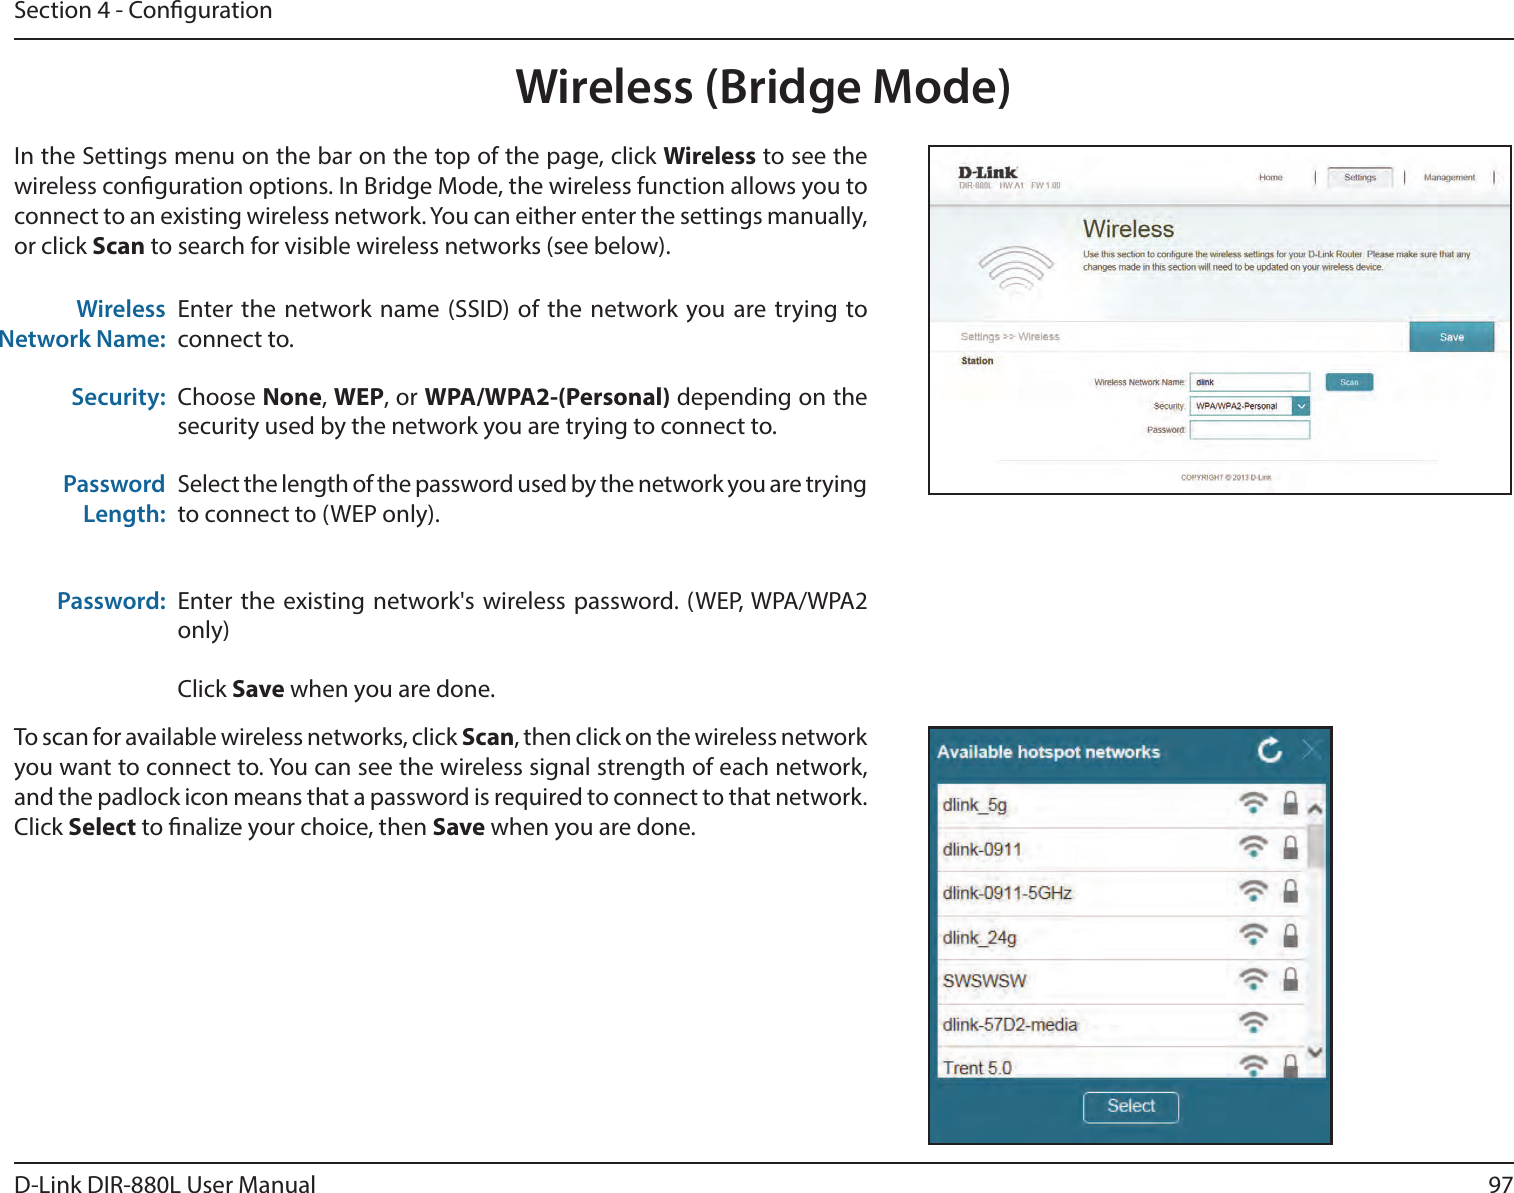 97D-Link DIR-880L User ManualSection 4 - CongurationWireless (Bridge Mode)Enter the network name (SSID) of the network you are trying to connect to. Choose None, WEP, or WPA/WPA2-(Personal) depending on the security used by the network you are trying to connect to.Select the length of the password used by the network you are trying to connect to (WEP only).Enter the existing network&apos;s wireless password. (WEP, WPA/WPA2 only)Click Save when you are done.Wireless Network Name:Security:Password Length:Password:In the Settings menu on the bar on the top of the page, click Wireless to see the wireless conguration options. In Bridge Mode, the wireless function allows you to connect to an existing wireless network. You can either enter the settings manually, or click Scan to search for visible wireless networks (see below).To scan for available wireless networks, click Scan, then click on the wireless network you want to connect to. You can see the wireless signal strength of each network, and the padlock icon means that a password is required to connect to that network. Click Select to nalize your choice, then Save when you are done.